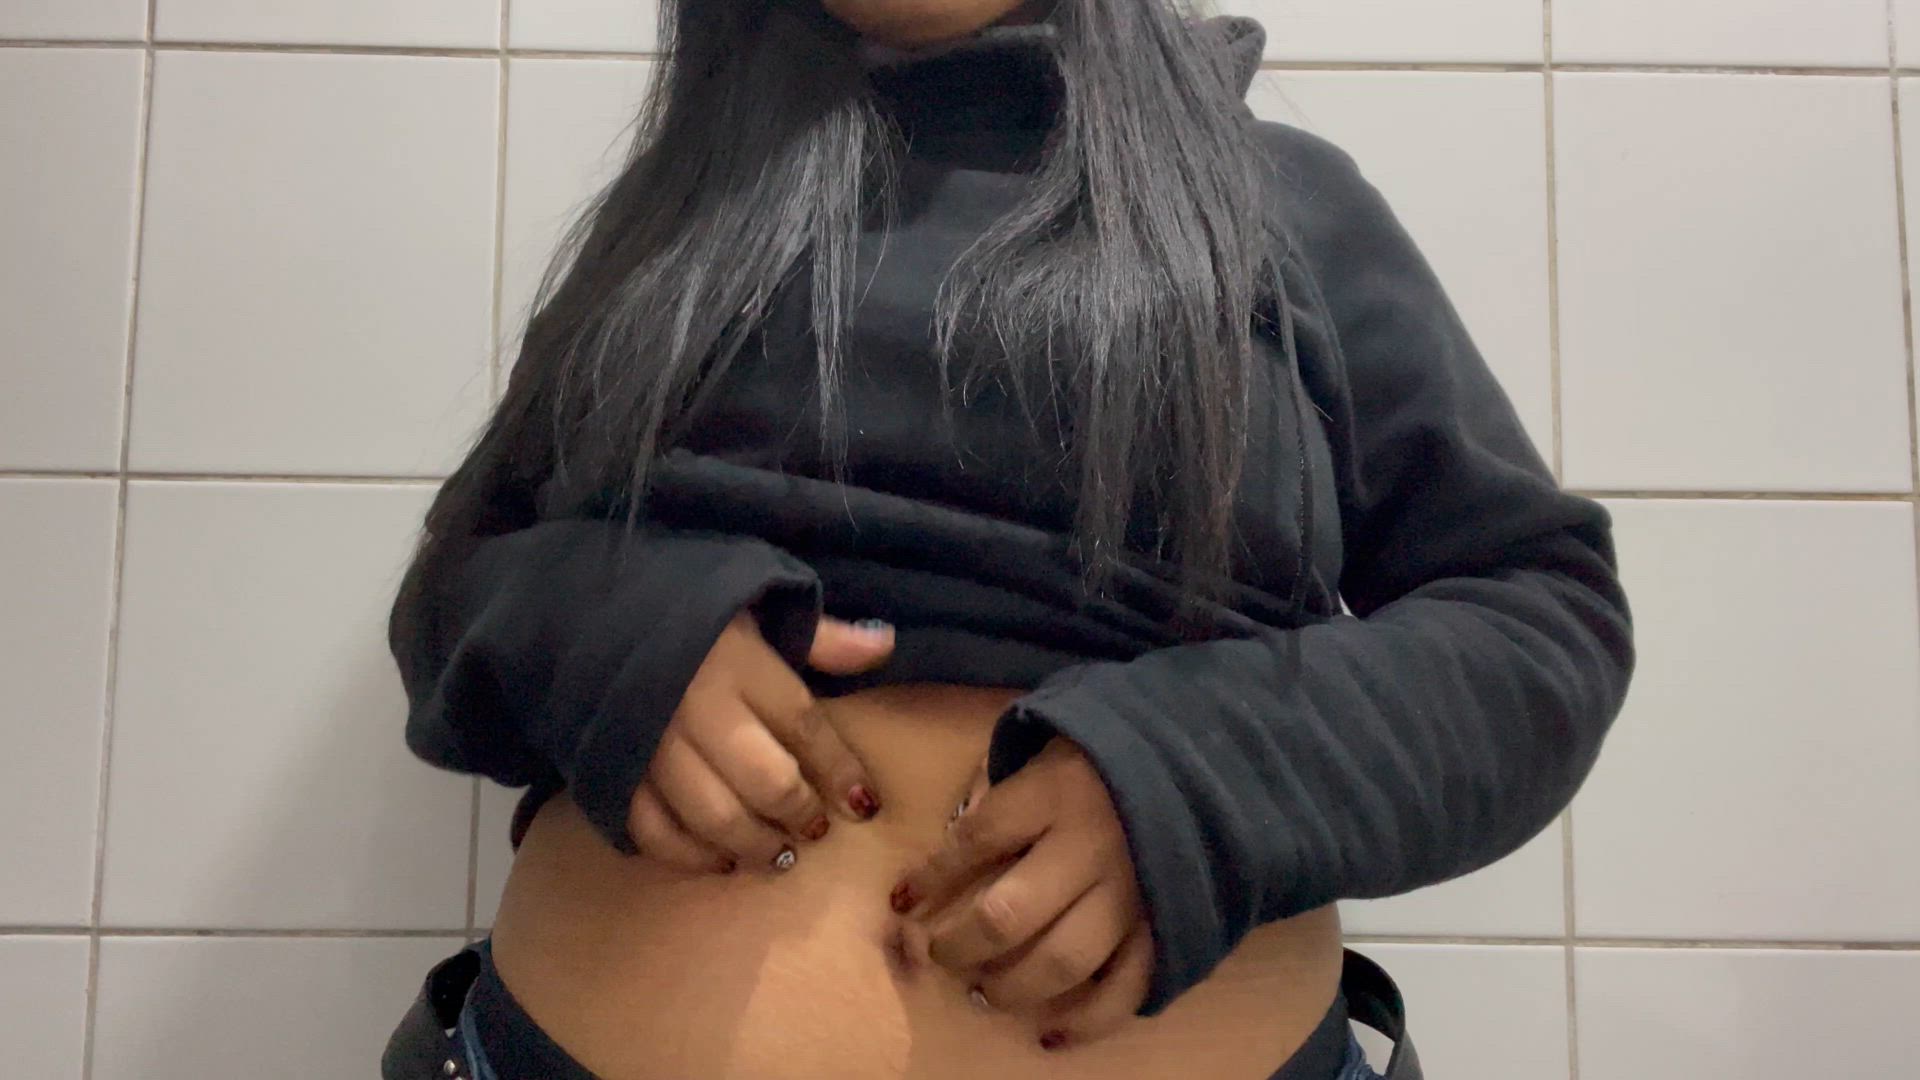 Tits porn video with onlyfans model xchocokrispis <strong>@xchocokrispisvip</strong>